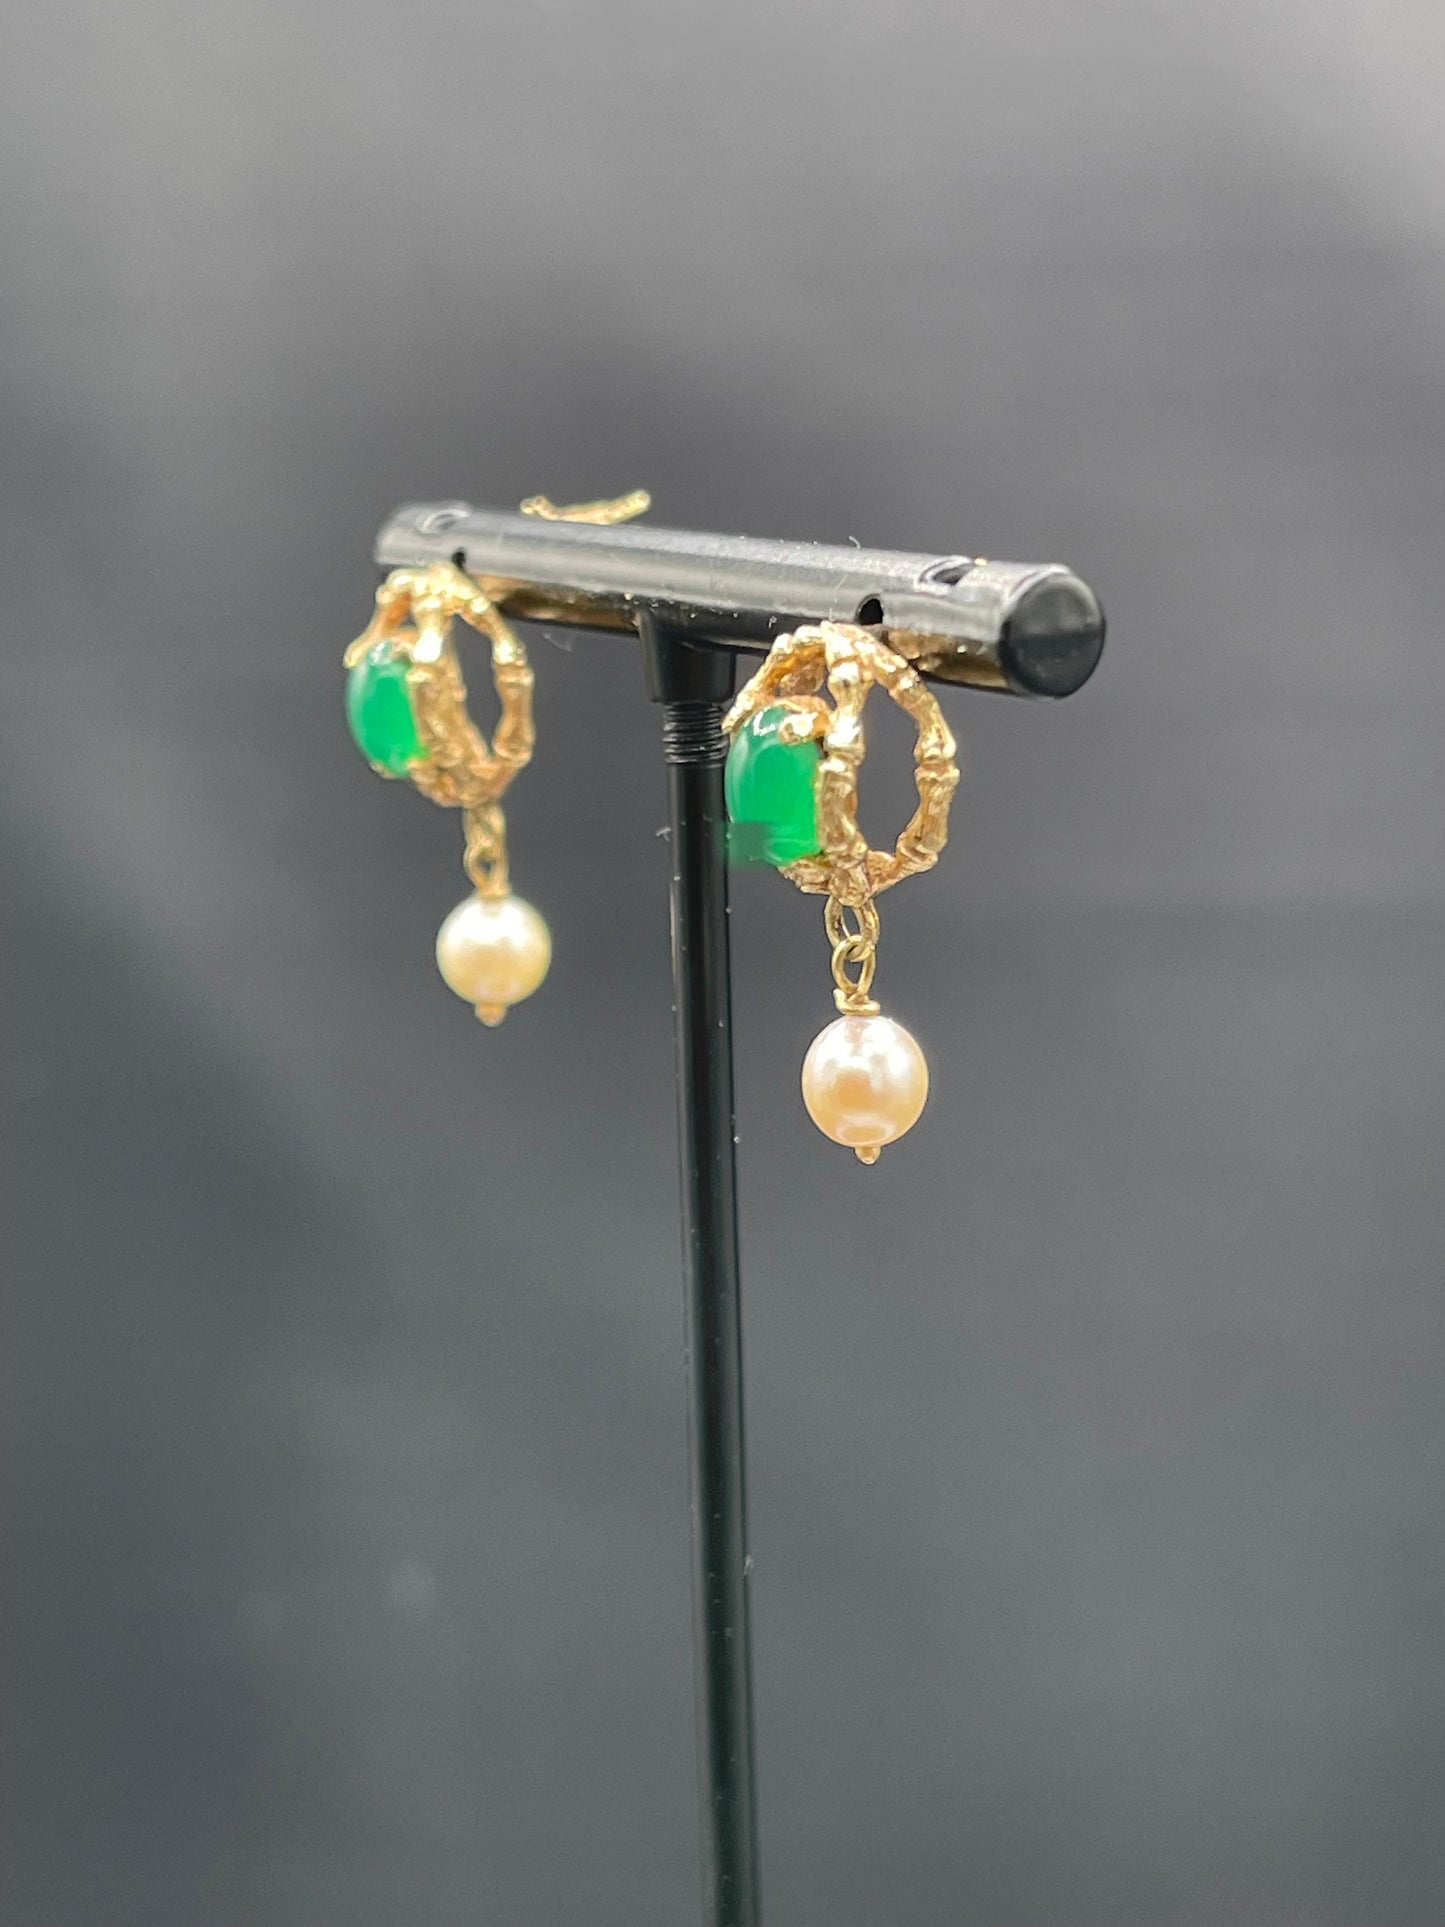 Natural Cabochon Emerald & Cultured Pearl 14k Yellow Gold Dangle Earrings